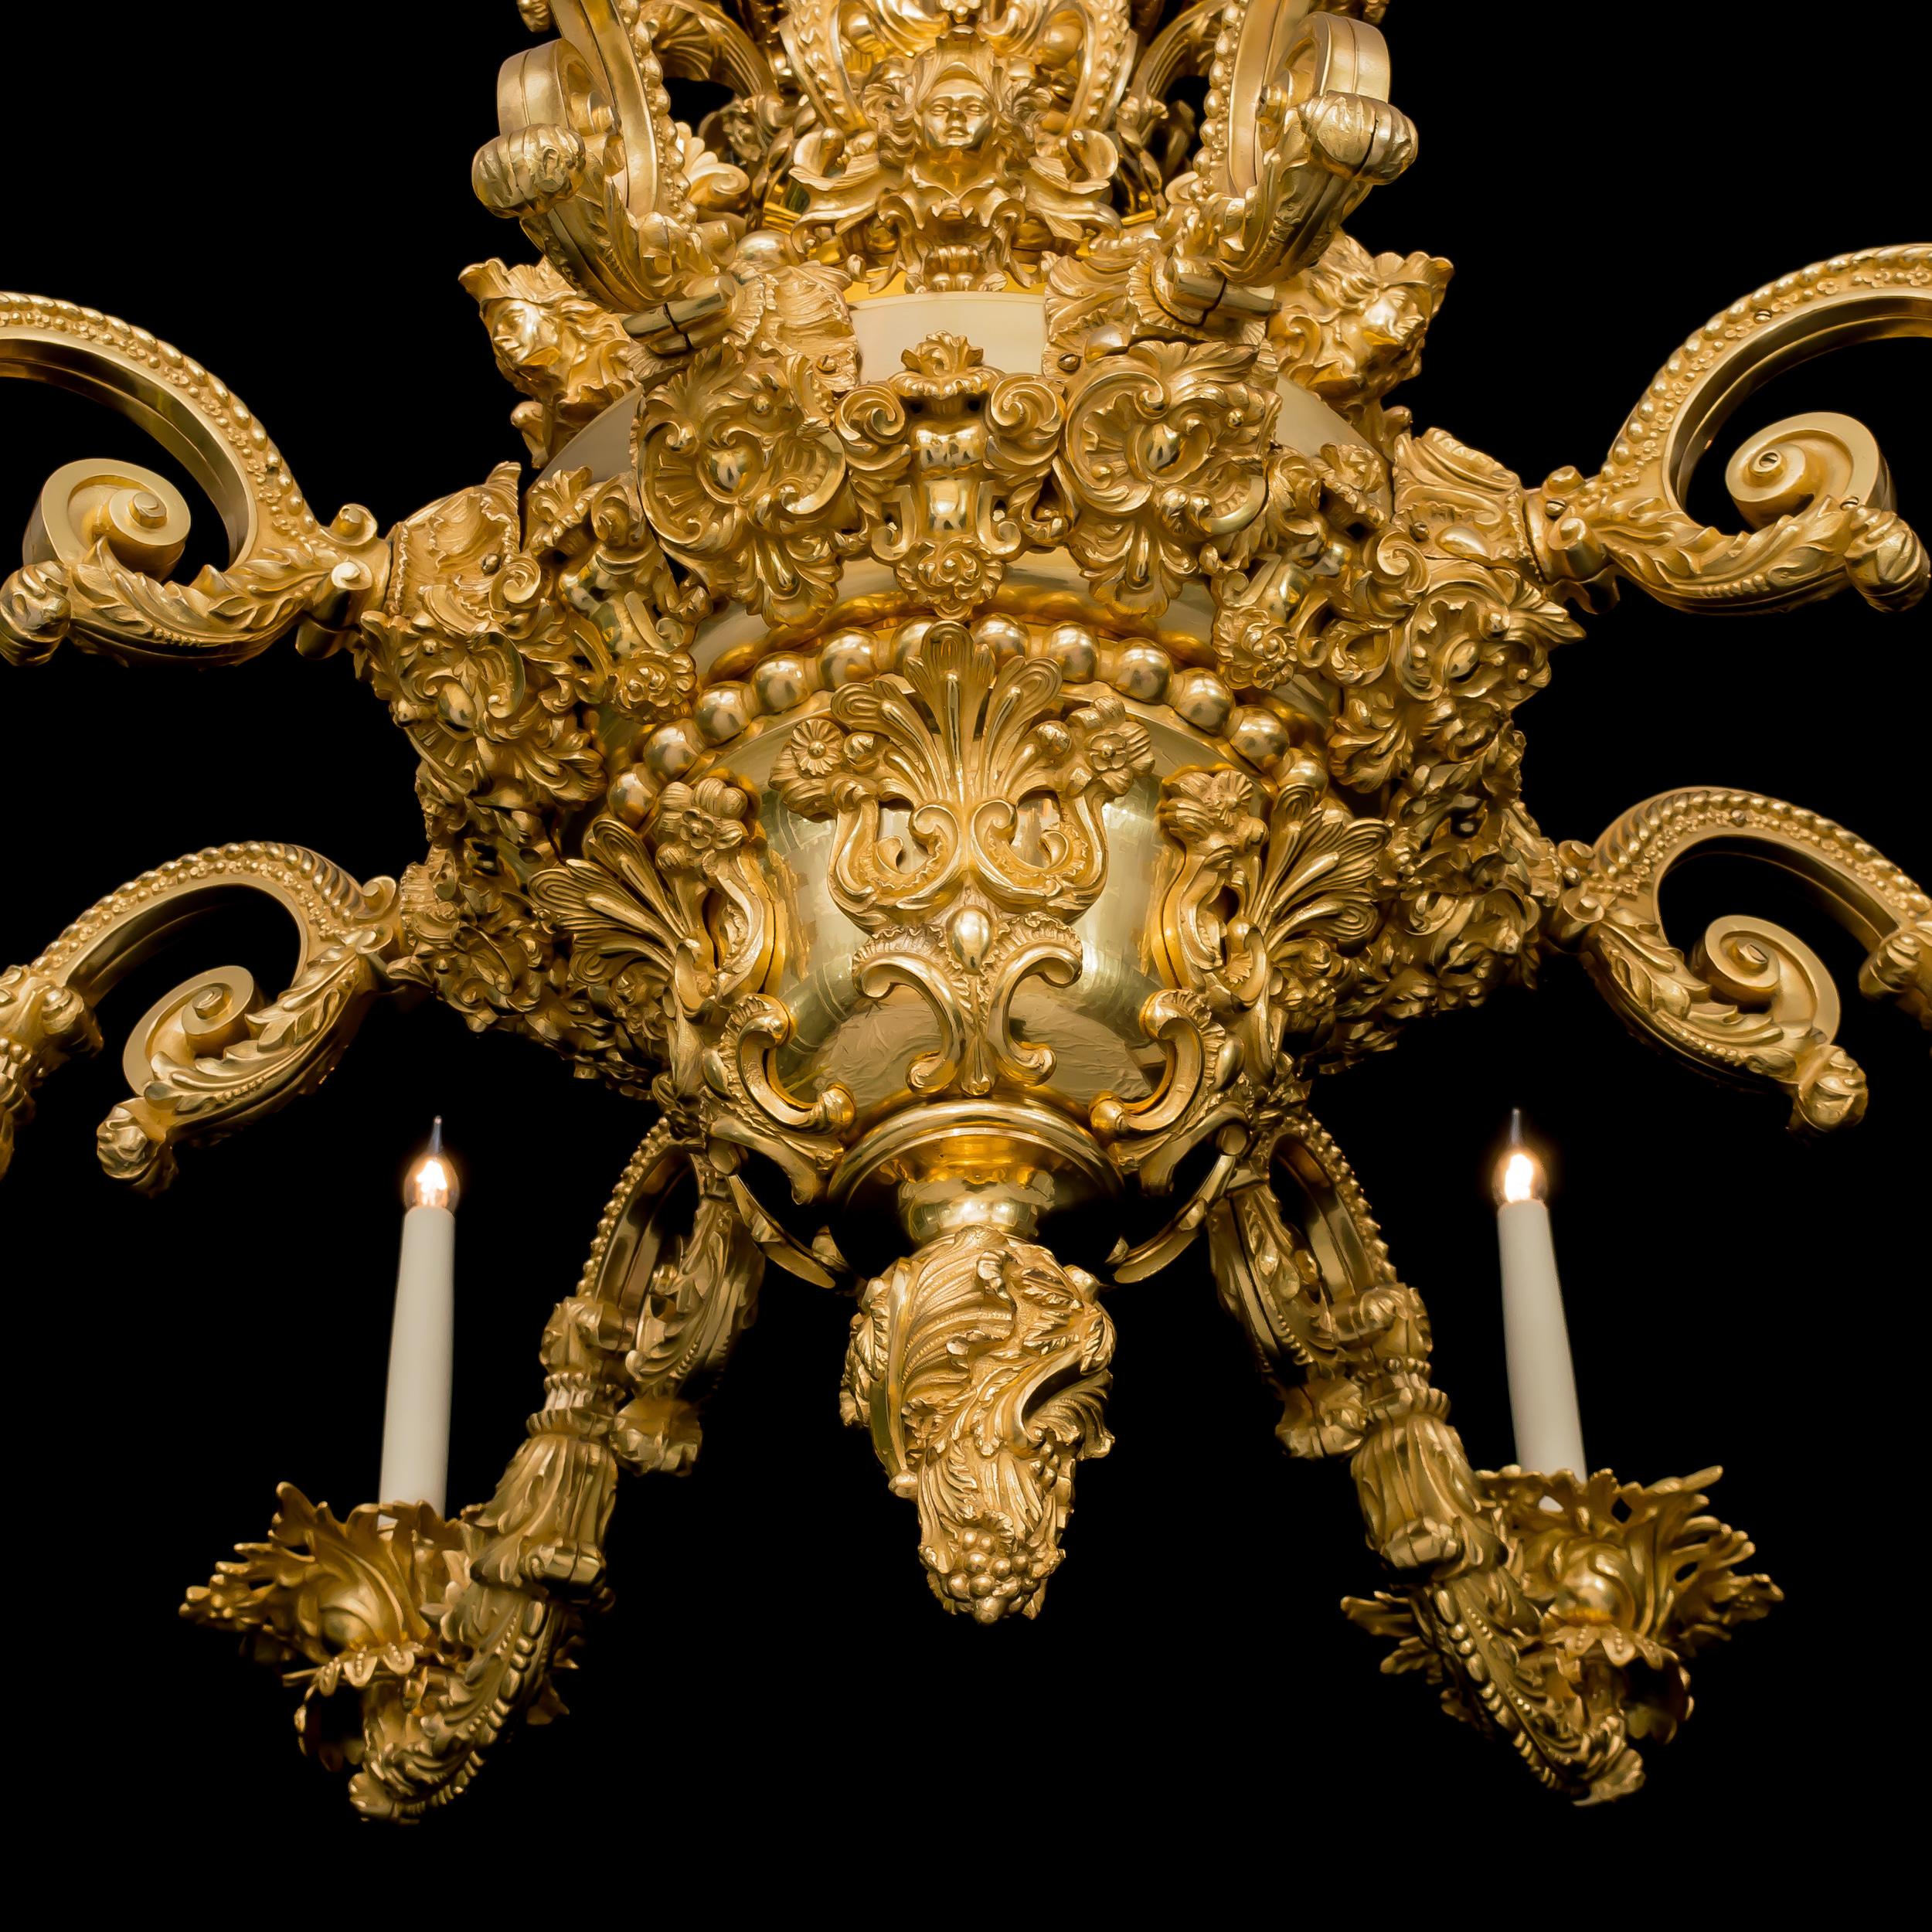 Magnificent George IV Period Ormolu Chandelier by Messenger & Phipson For Sale 5